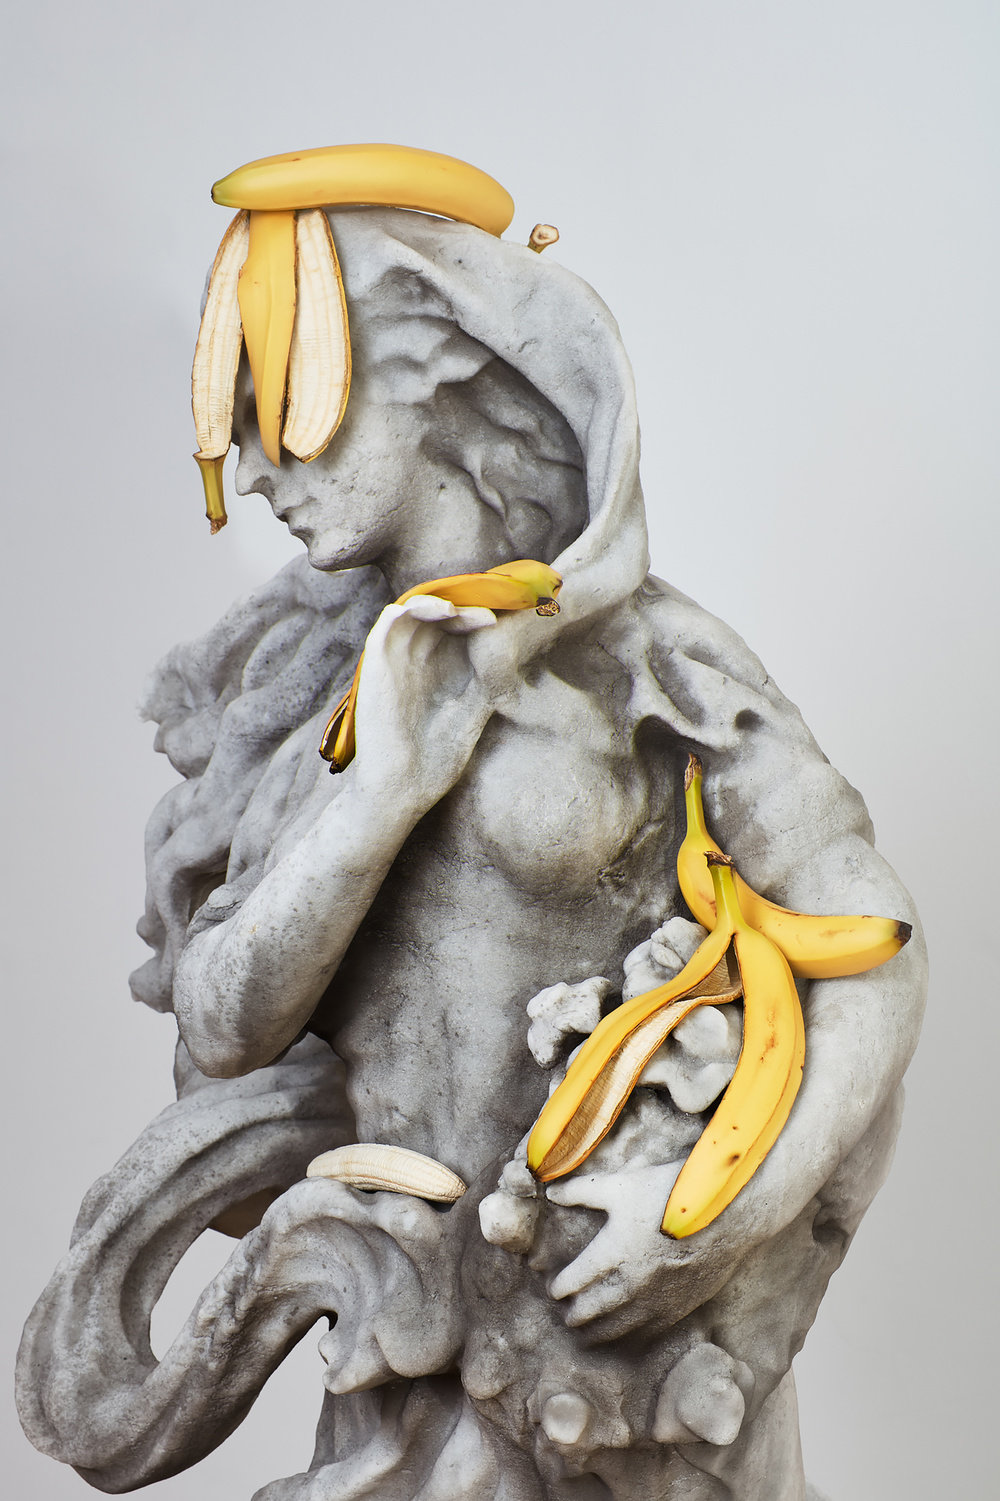 Matelli, woman in the wind (detail 3), 2017, marble and painted bronze, 68 x 31 x 18 in., 172.7 x 78.4 x 45.7 cm, cnon 59.389